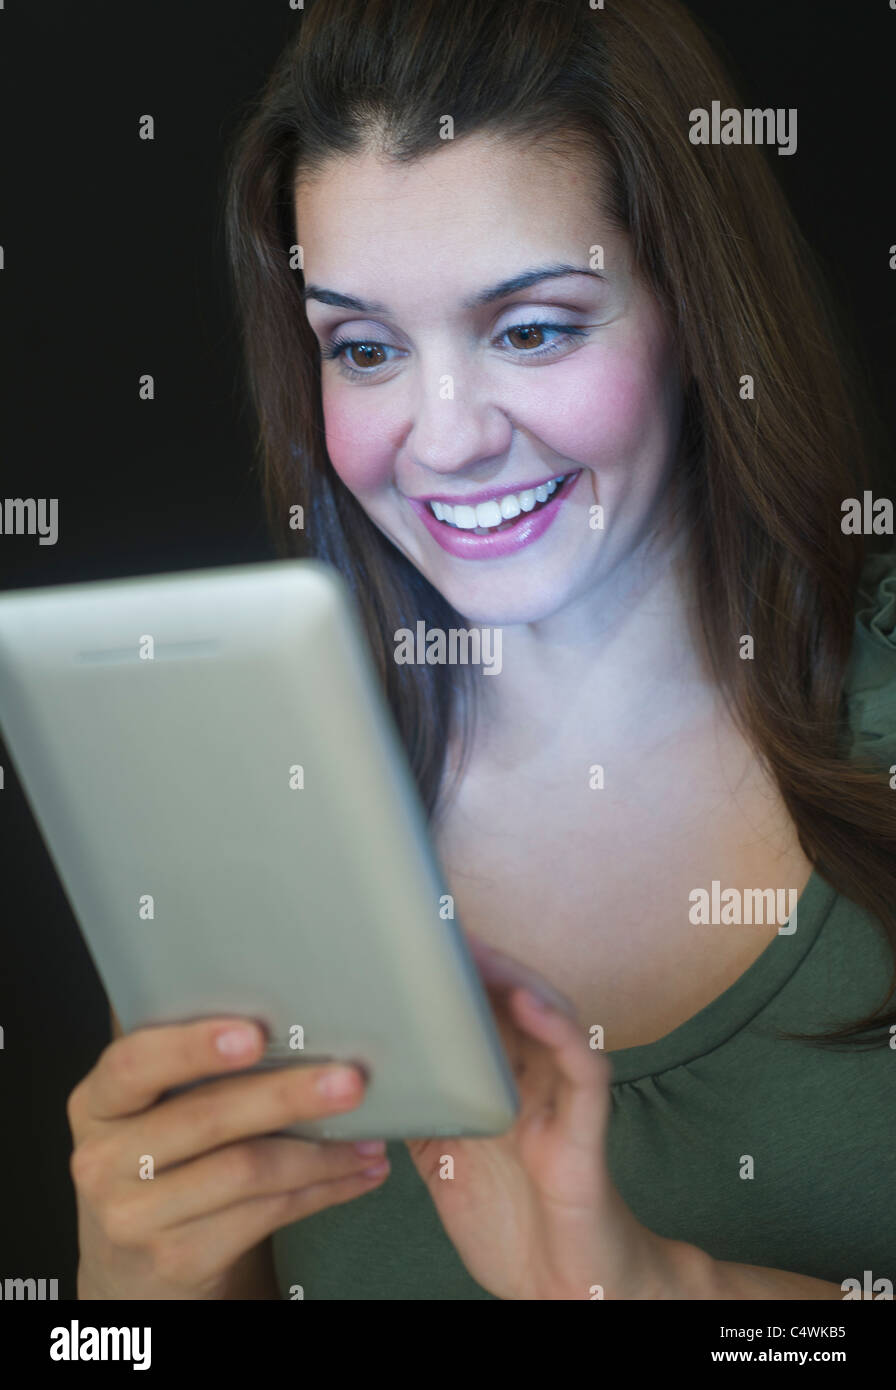 USA,New Jersey, Jersey City, young woman using digital tablet Banque D'Images